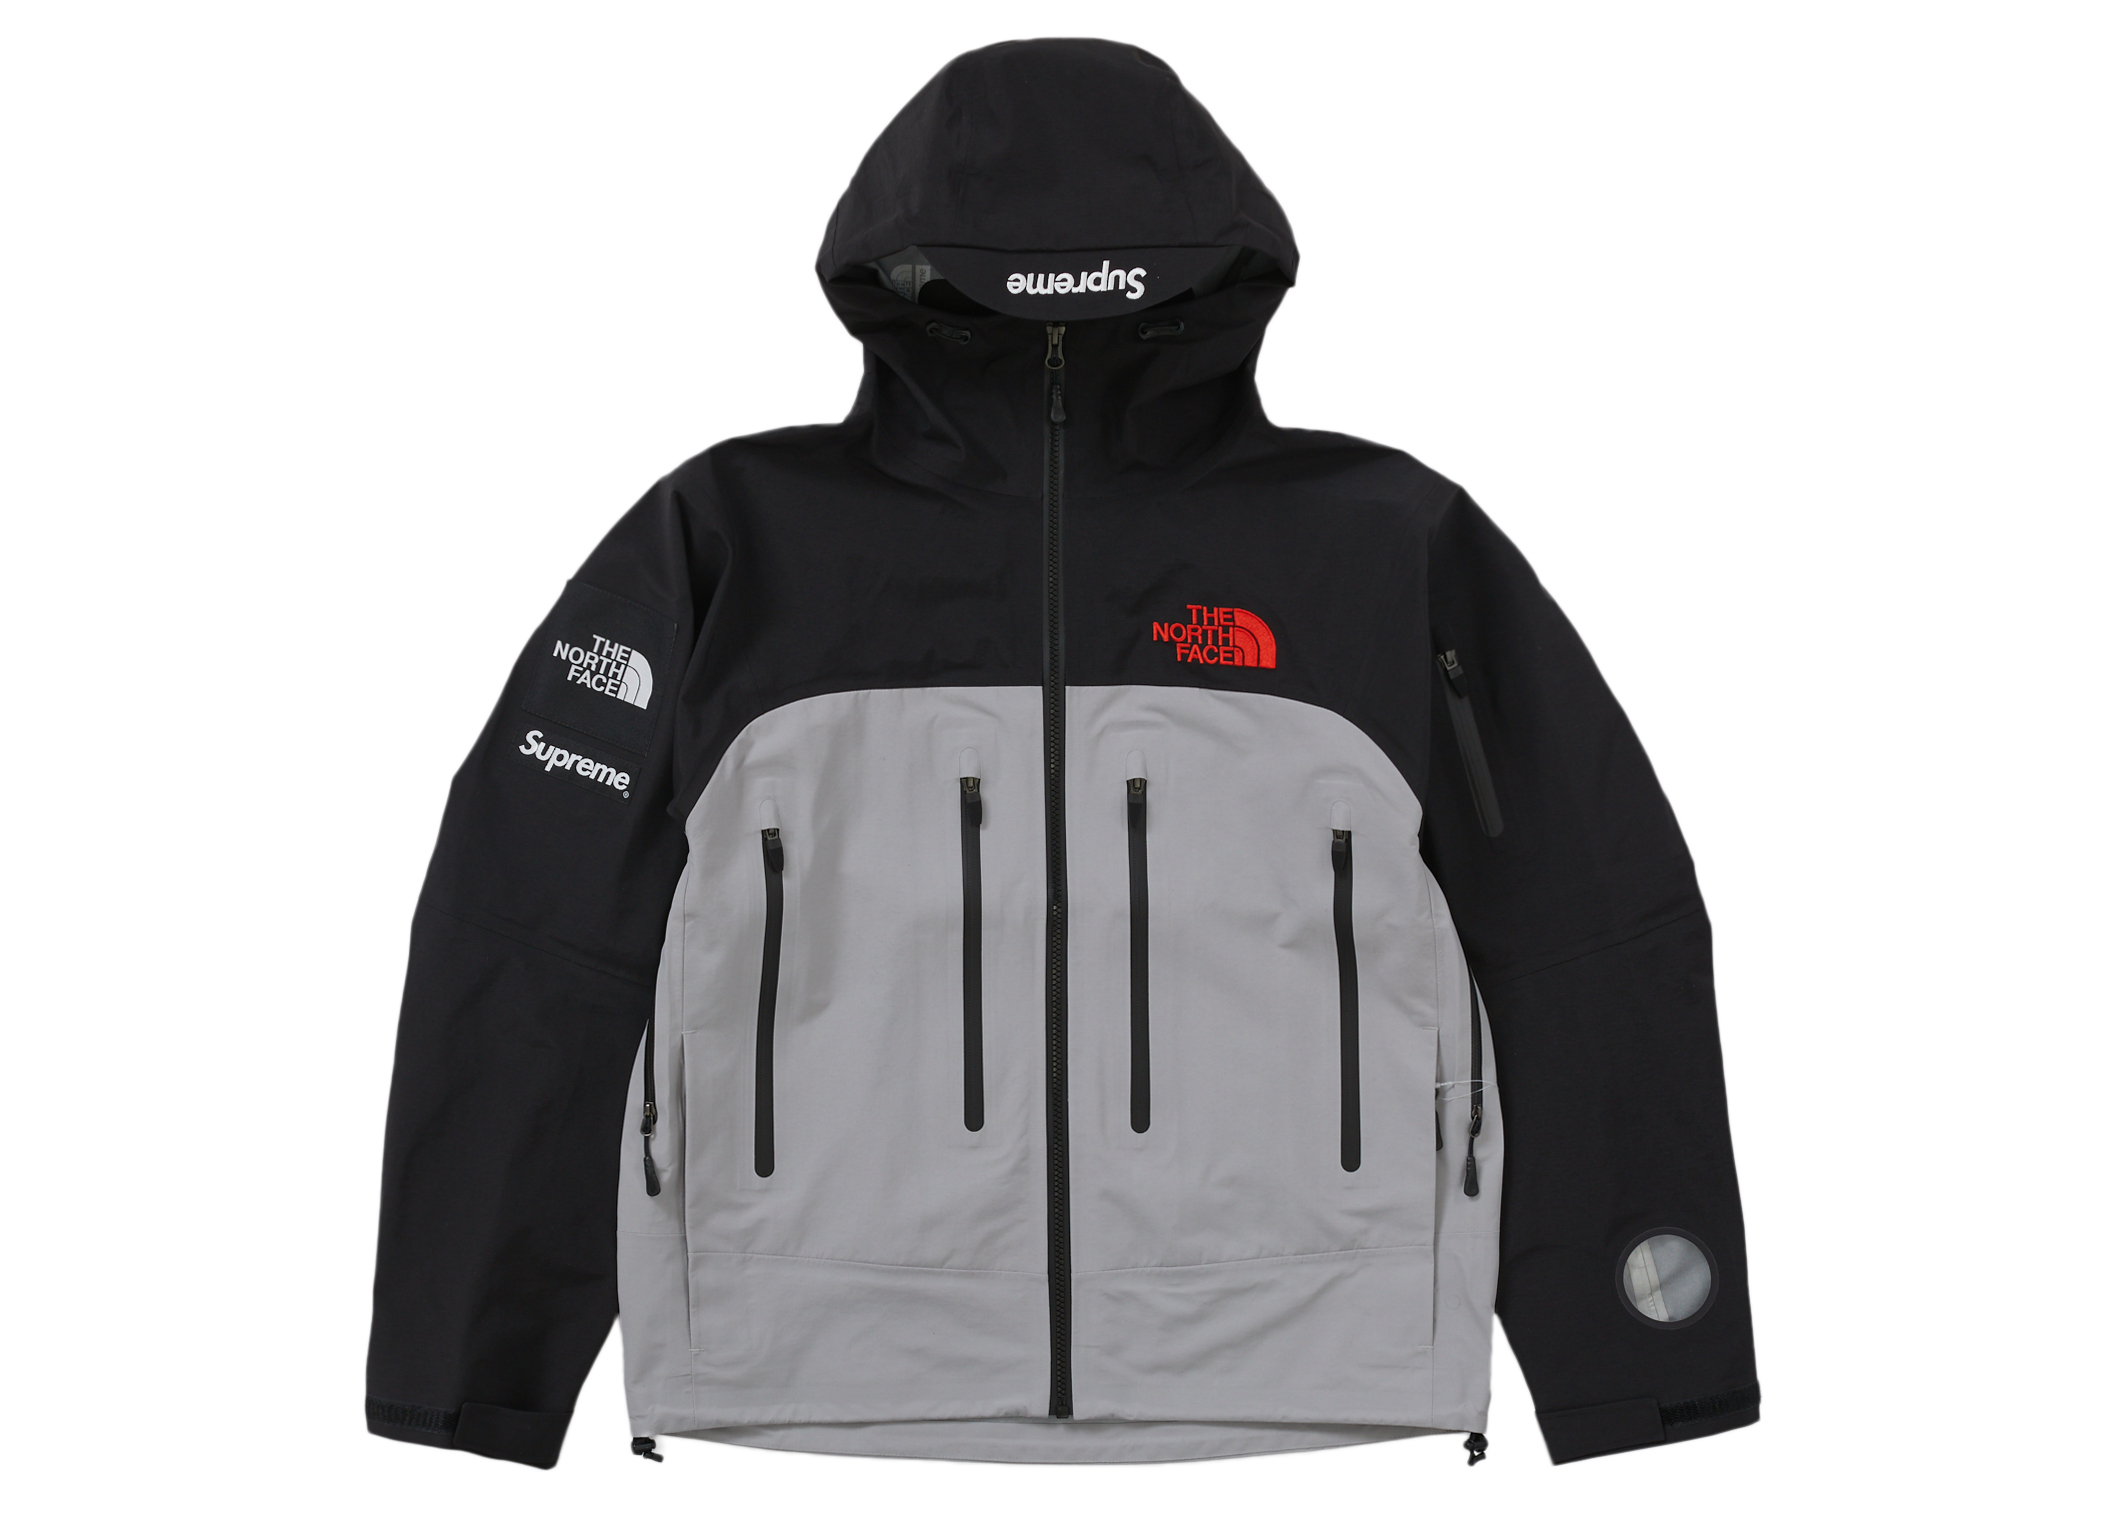 supreme THE NORTH FACE マウンテンパーカー　イエロー即発送